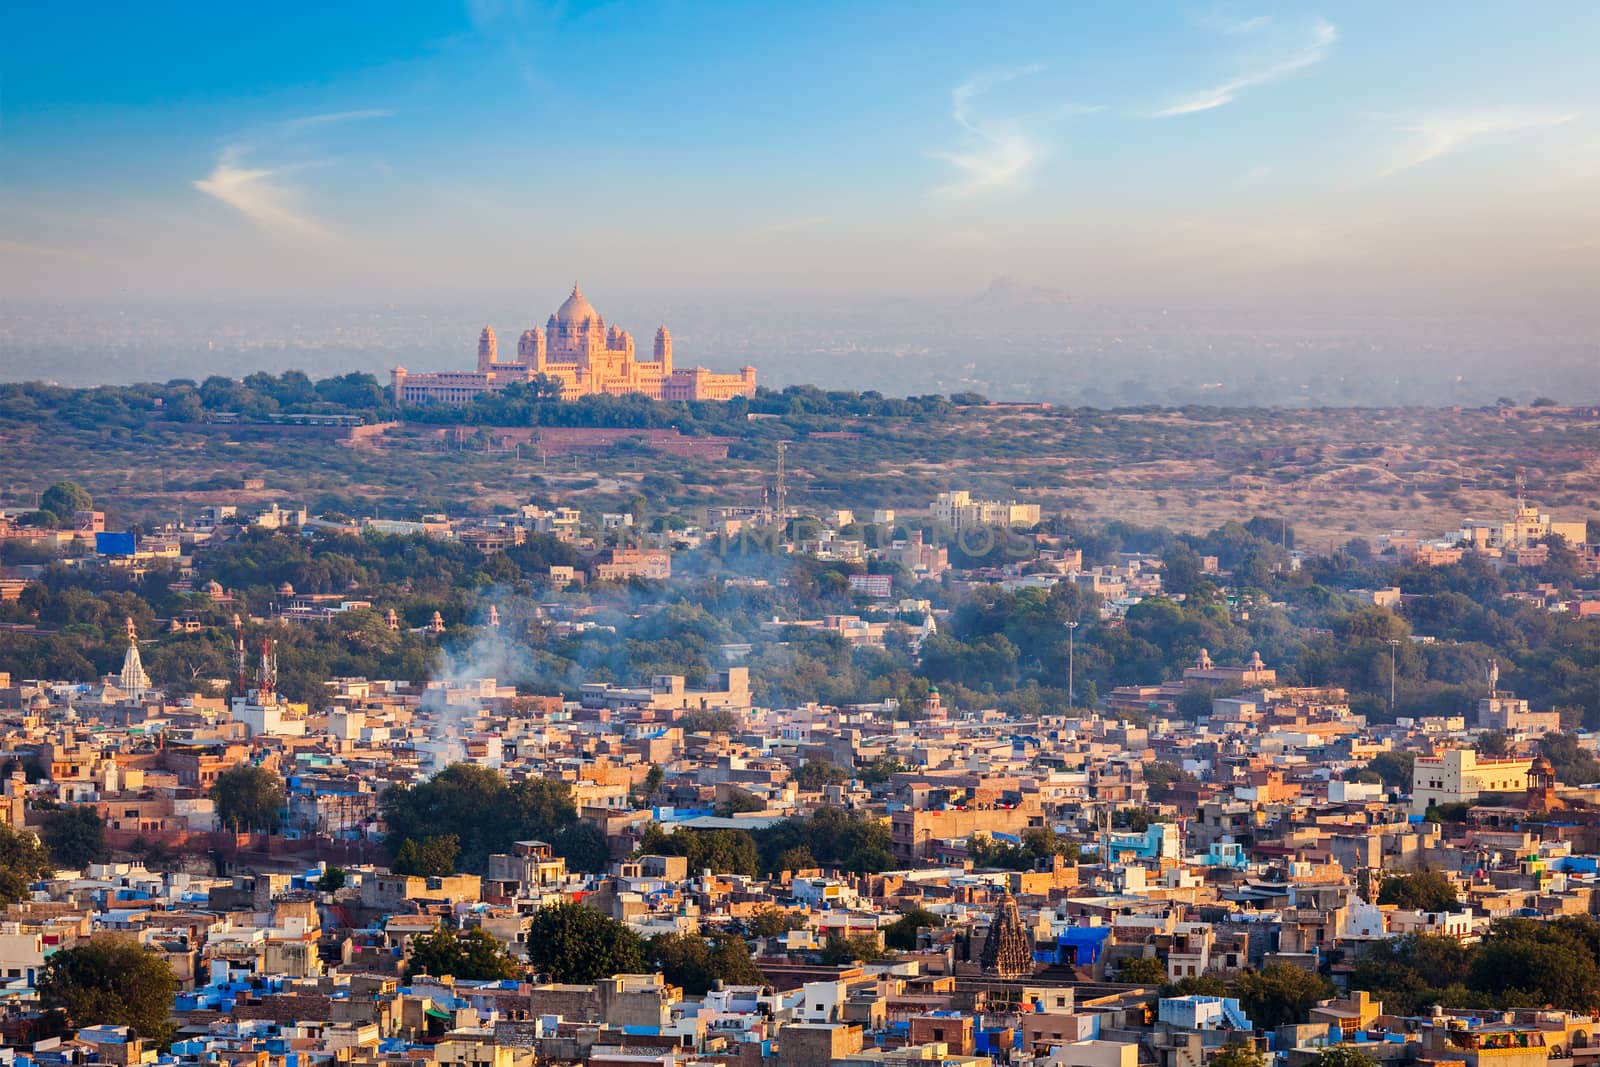 Aerial view of Jodhpur - the blue city. Rajasthan, India by dimol